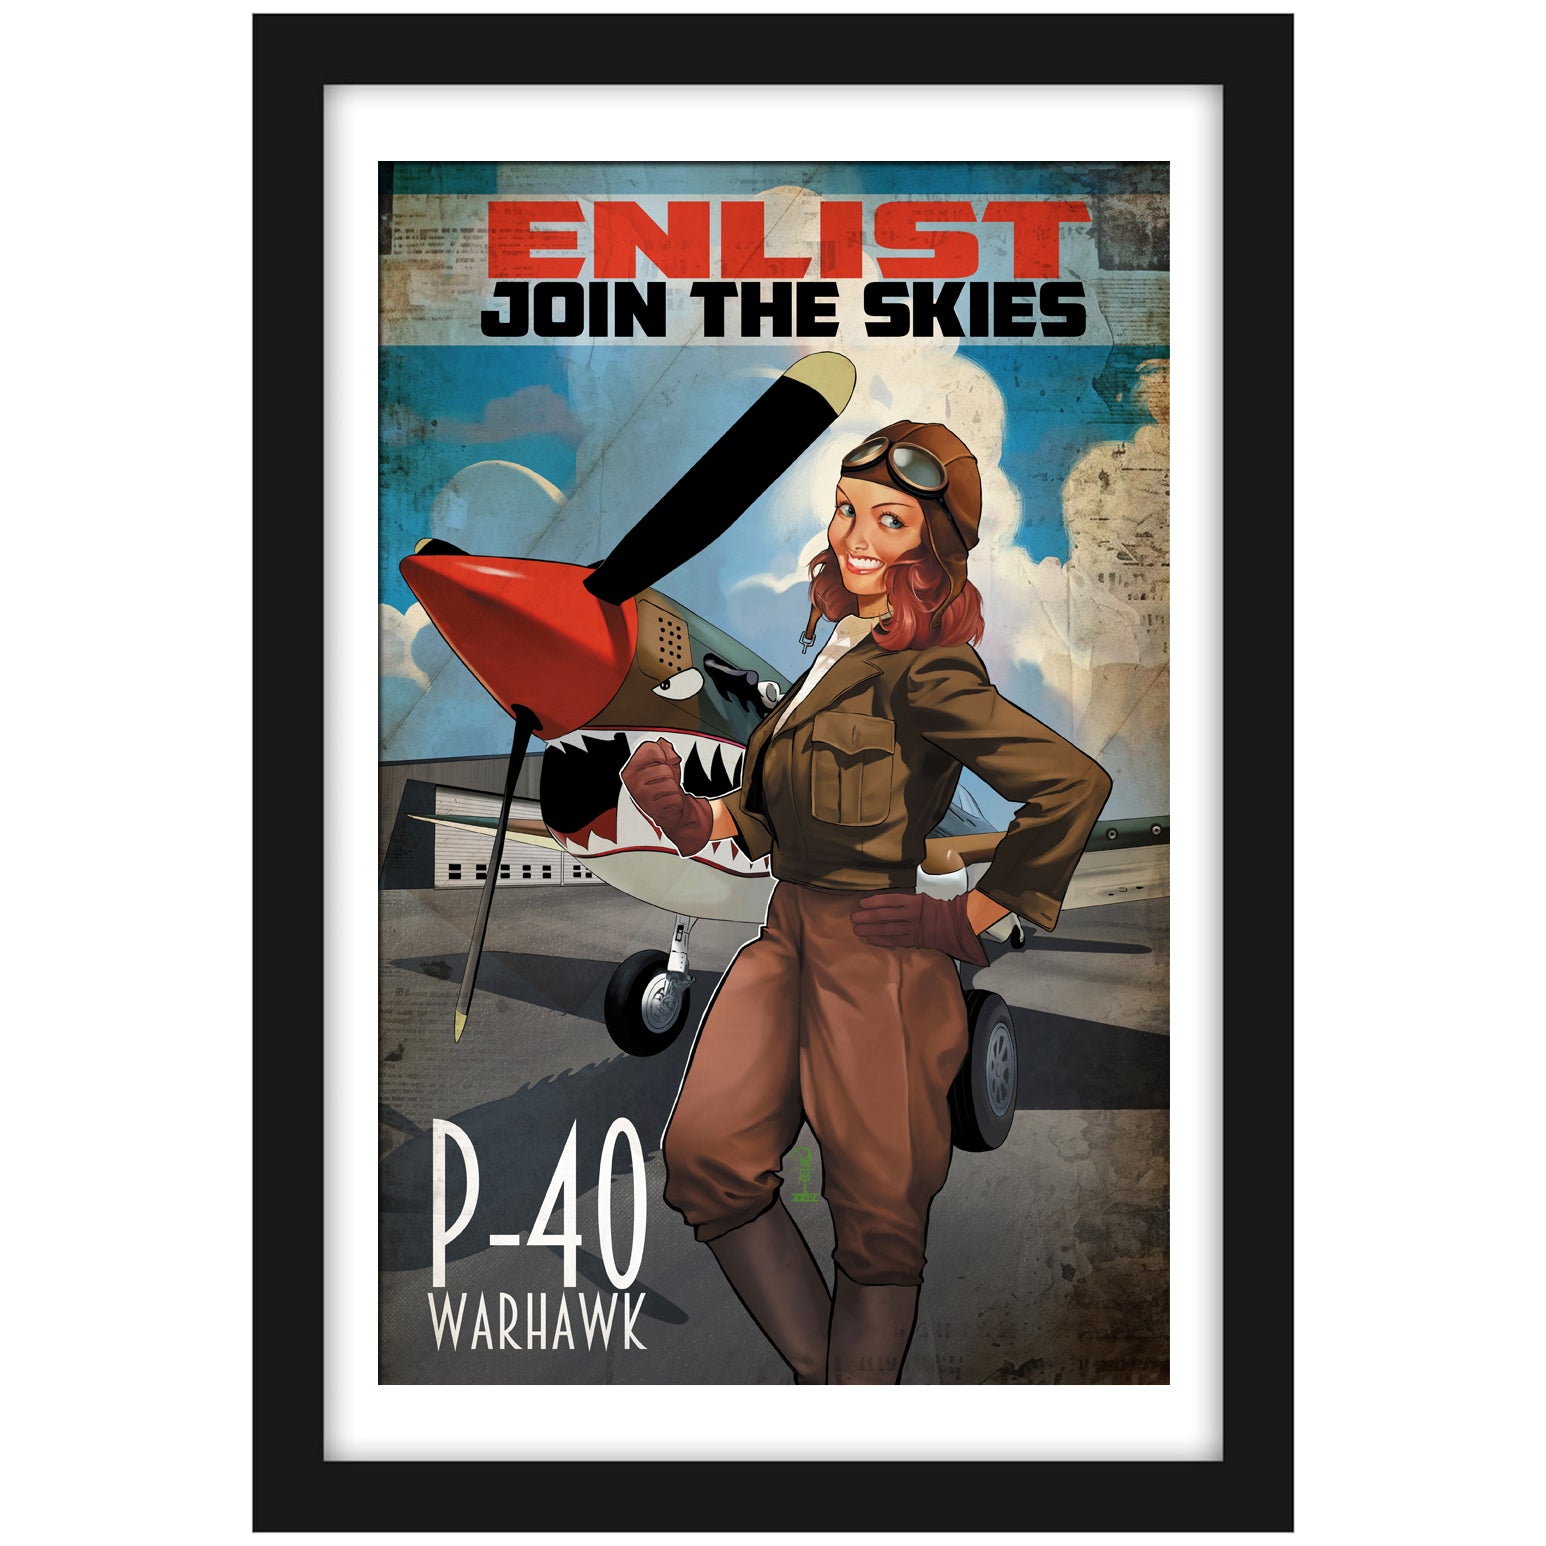 P-40 Warhawk "Enlist Join the Skies" - Vintage Print Pinup & Airplane Art by Romi Carlos - Limited Numbered Edition